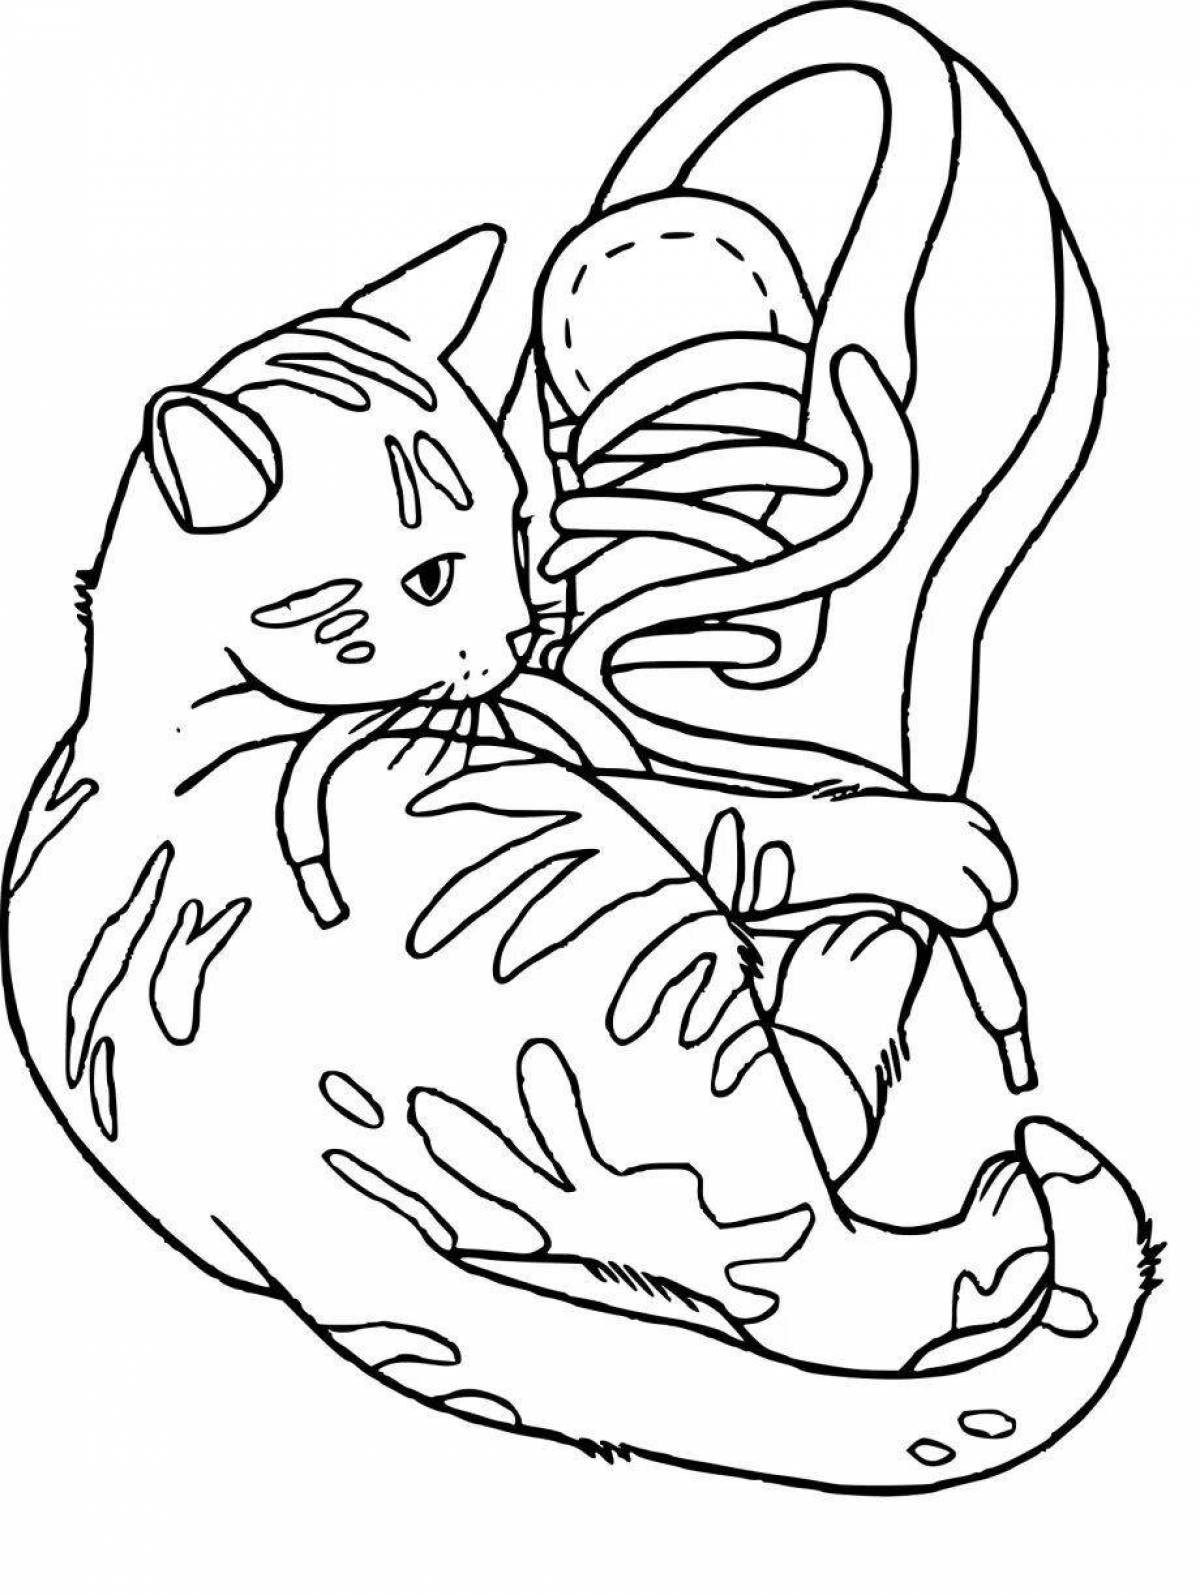 Adorable coloring book for 12 year old girls with cute cats